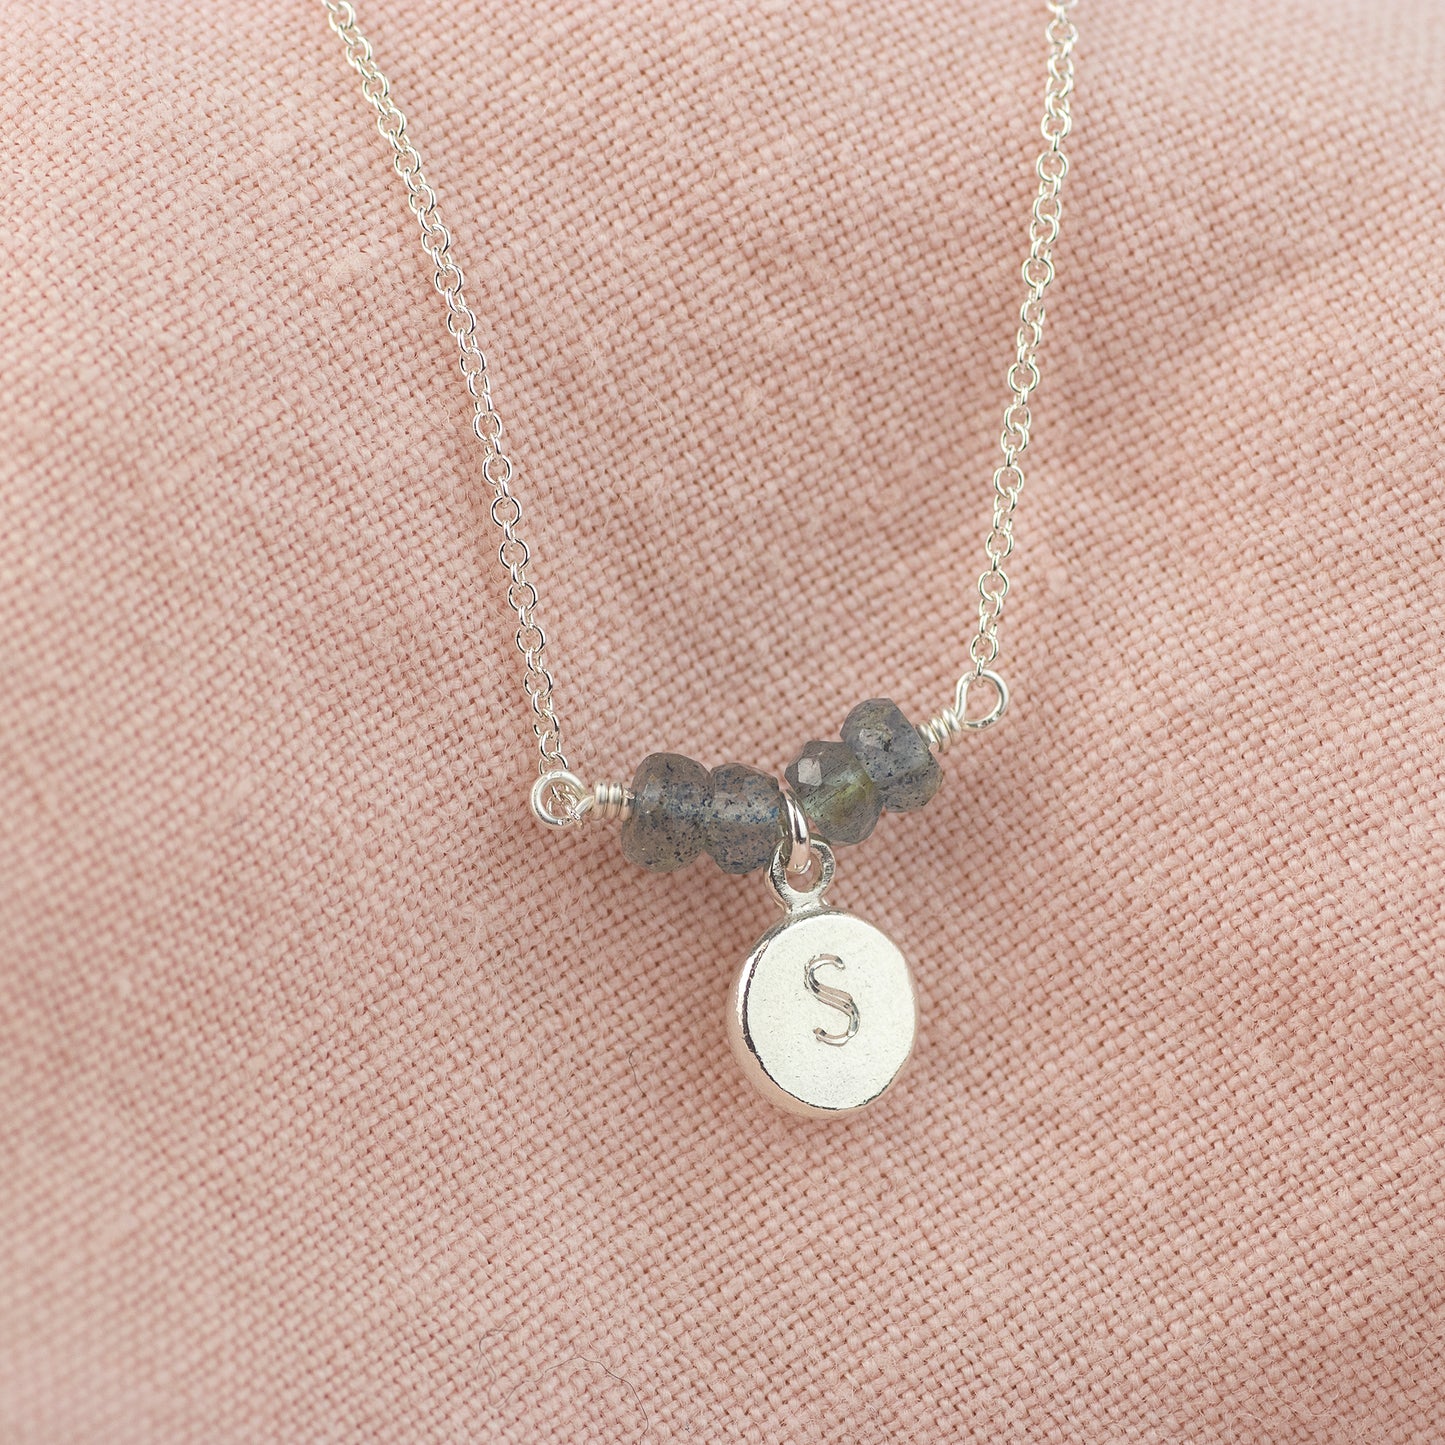 18th Birthday Present - Personalised Engraved Initial Birthstone Necklace